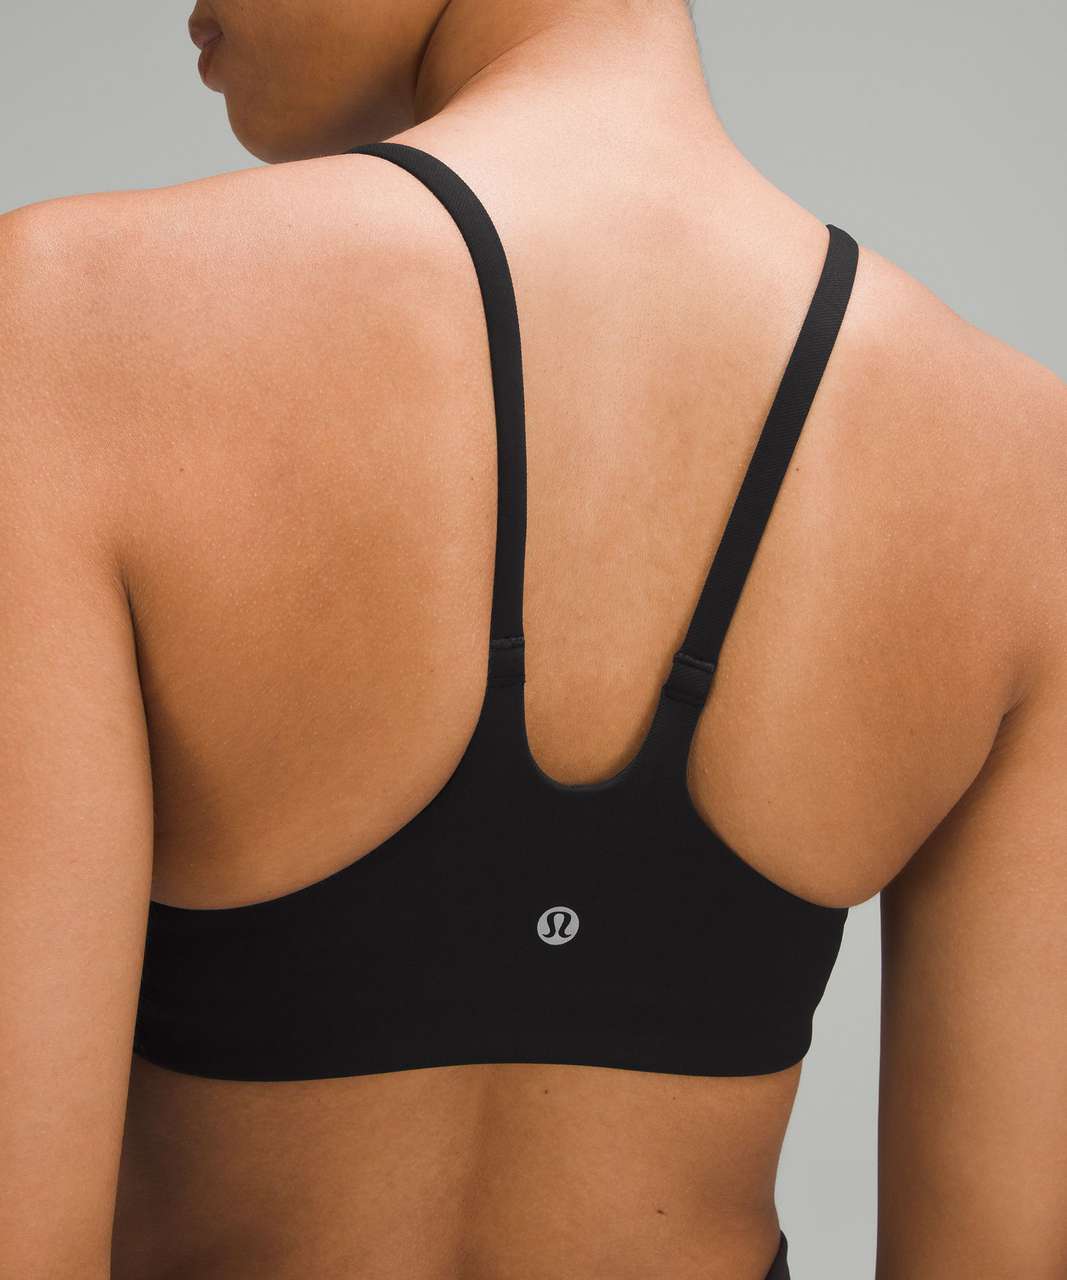 Lululemon Wunder Train Strappy Racer Bra Light Support, A/B Cup *Twill - Black